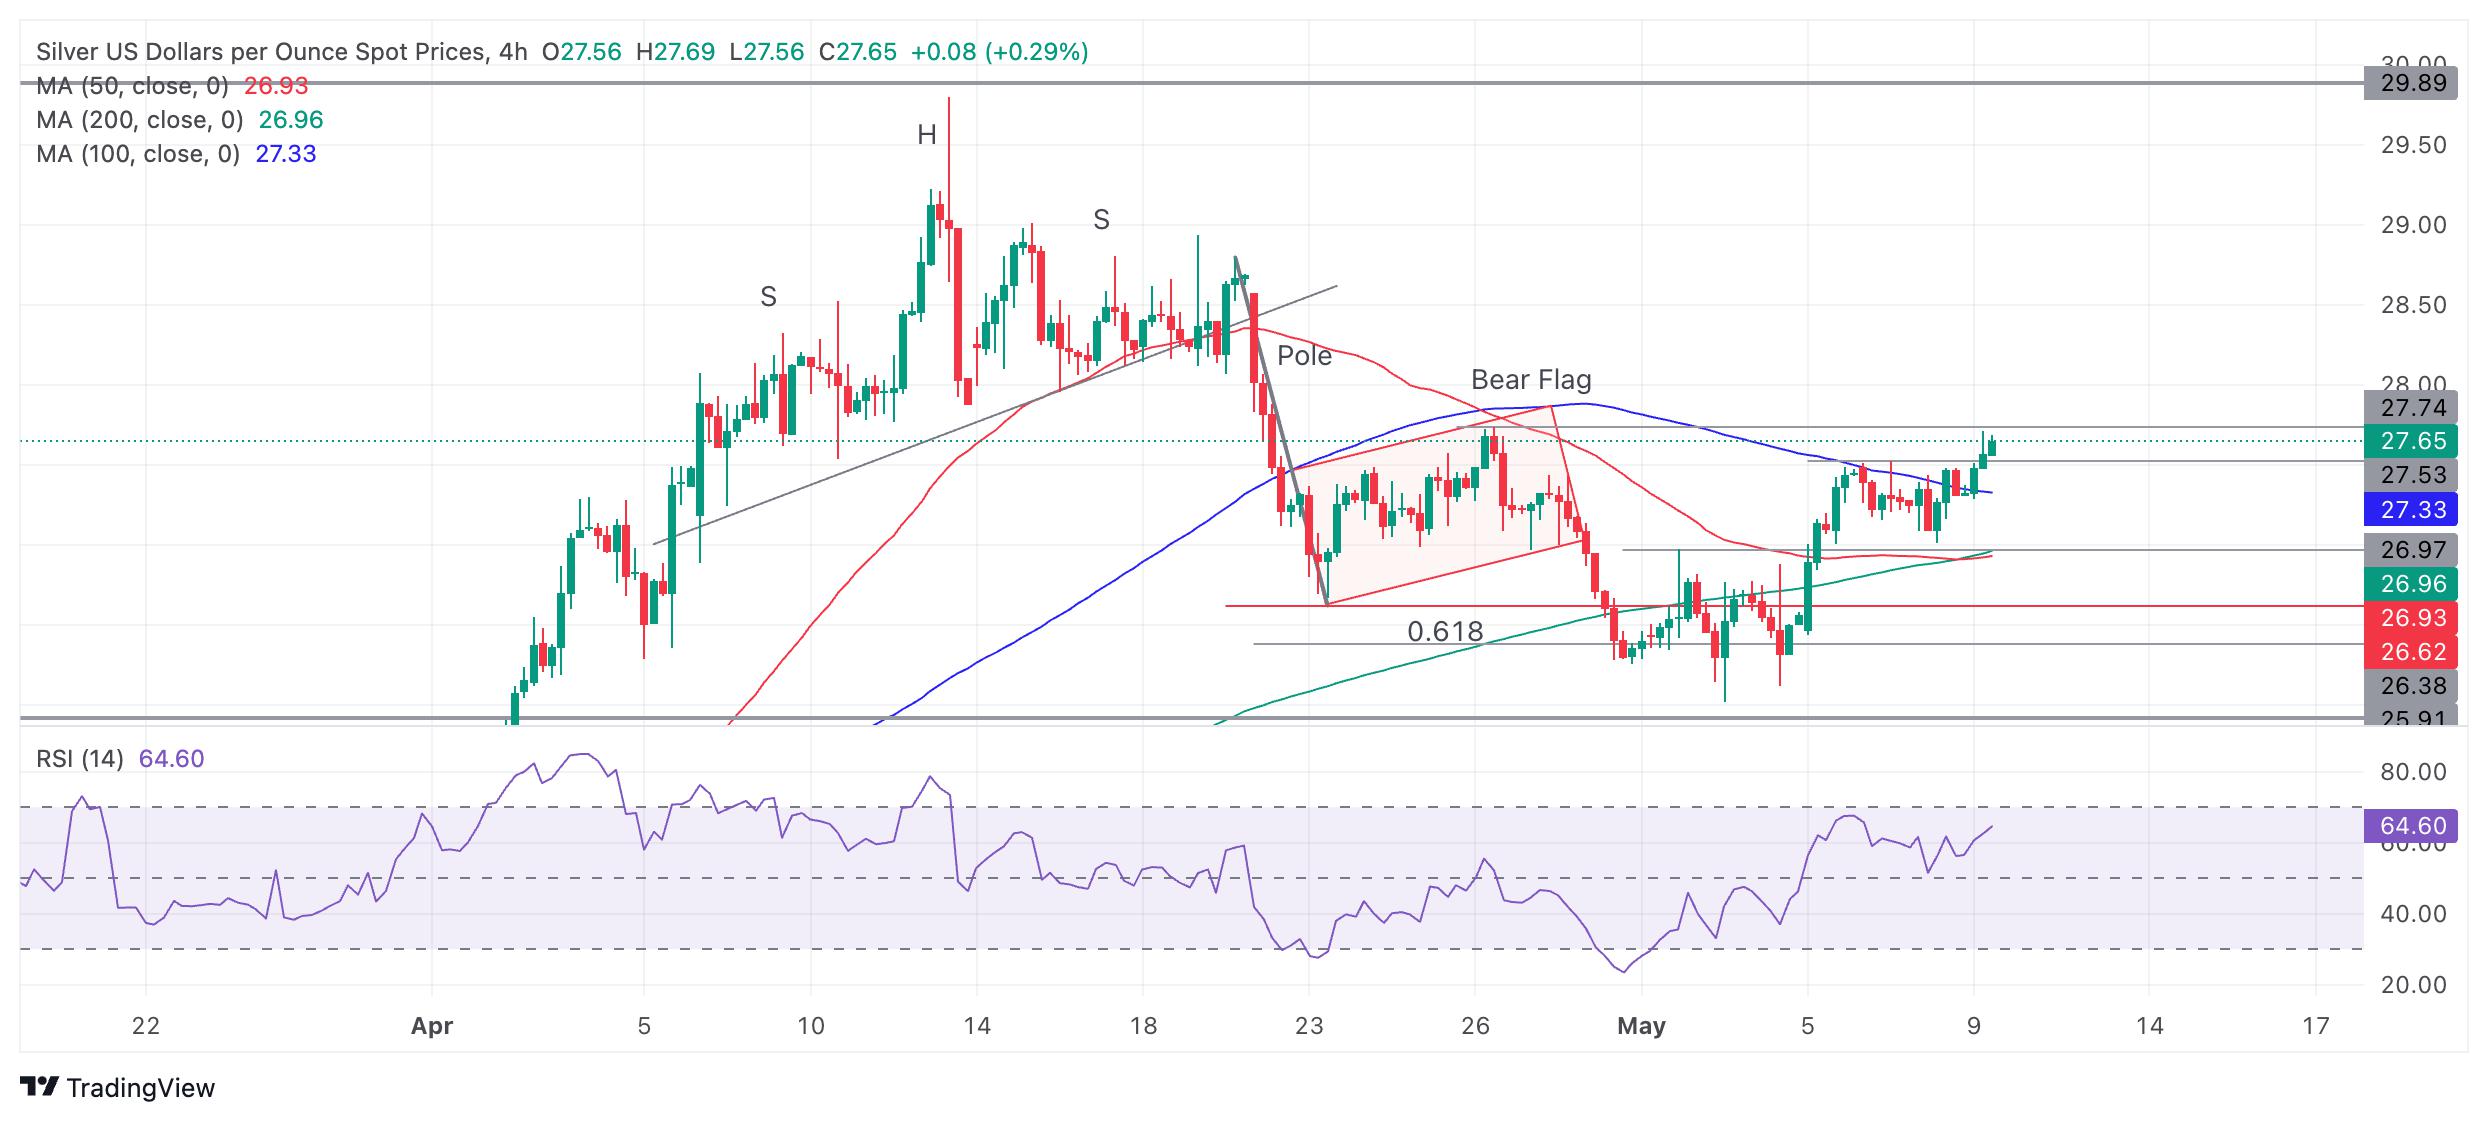 Silver Price Analysis: Silver is now probably in an uptrend